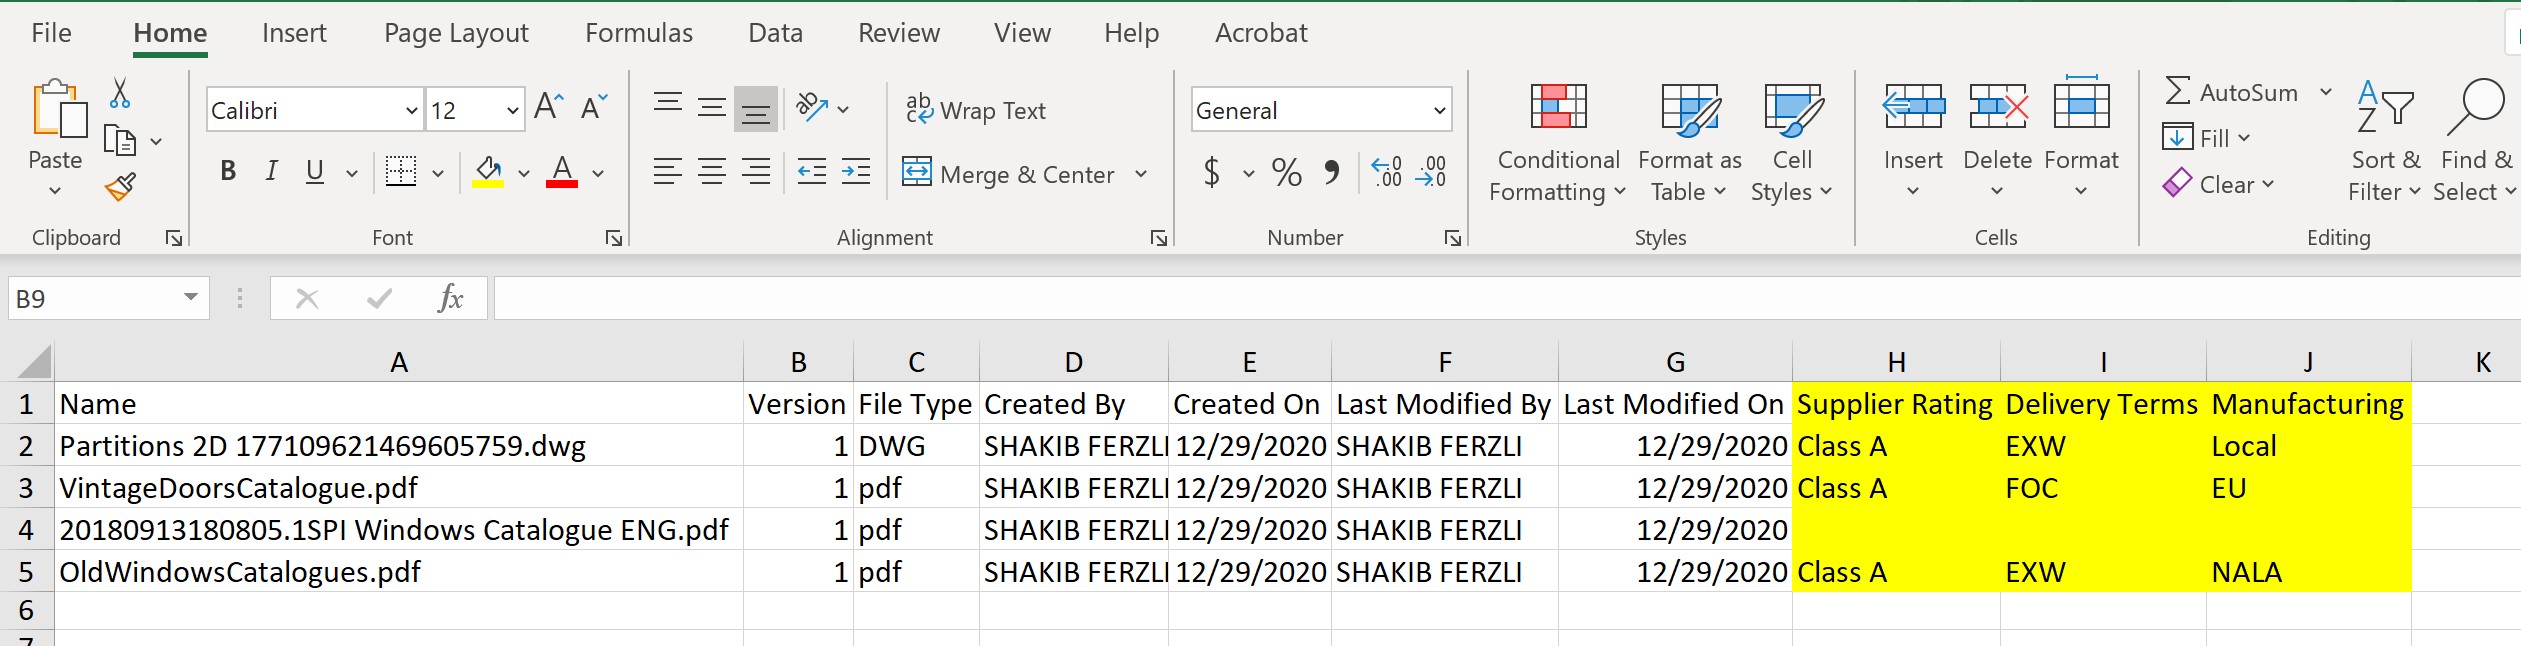 Power Search 2021 - Excel output